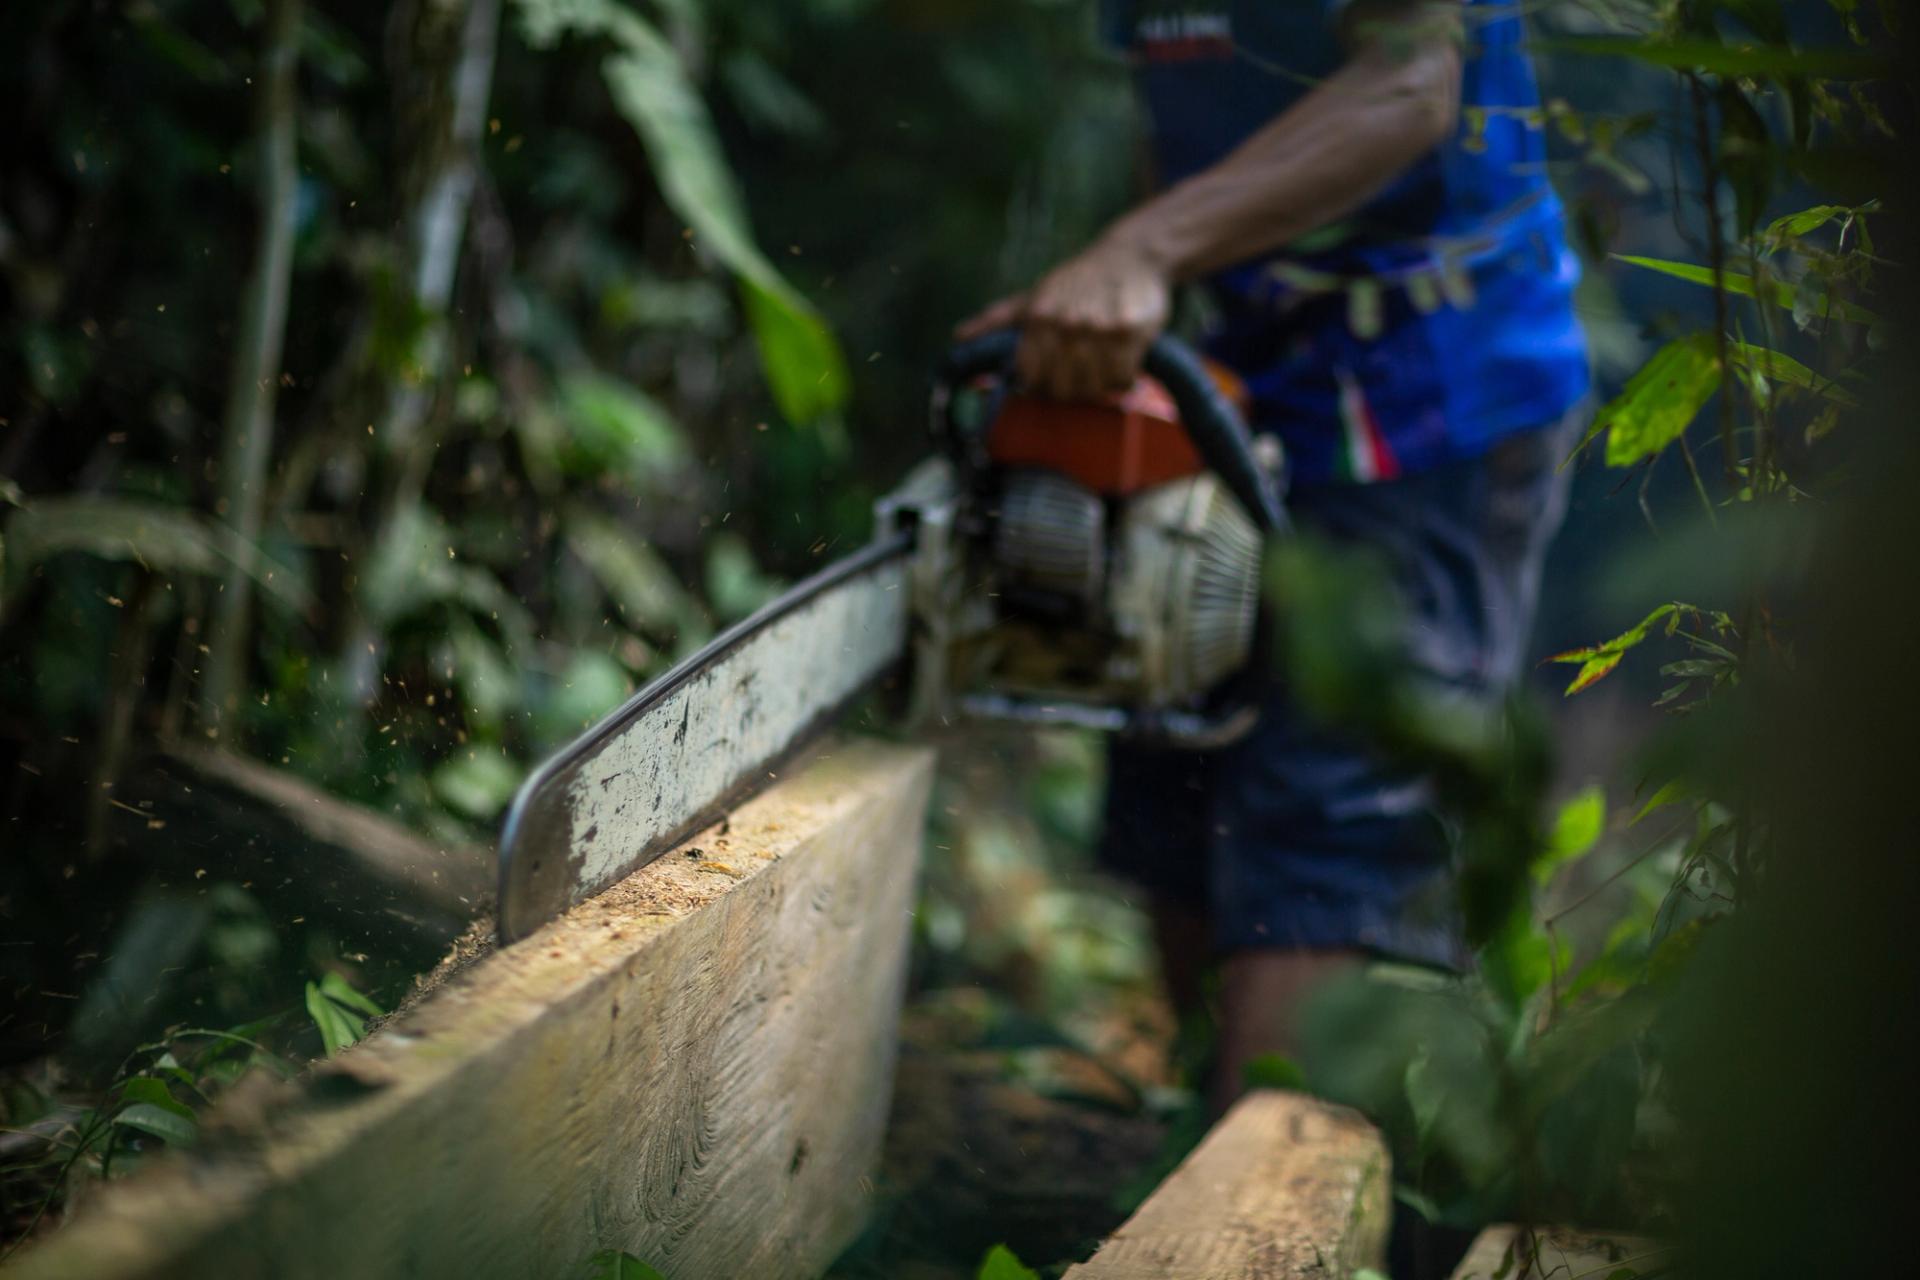 A person cutting wood with a chainsaw in a tropical forest